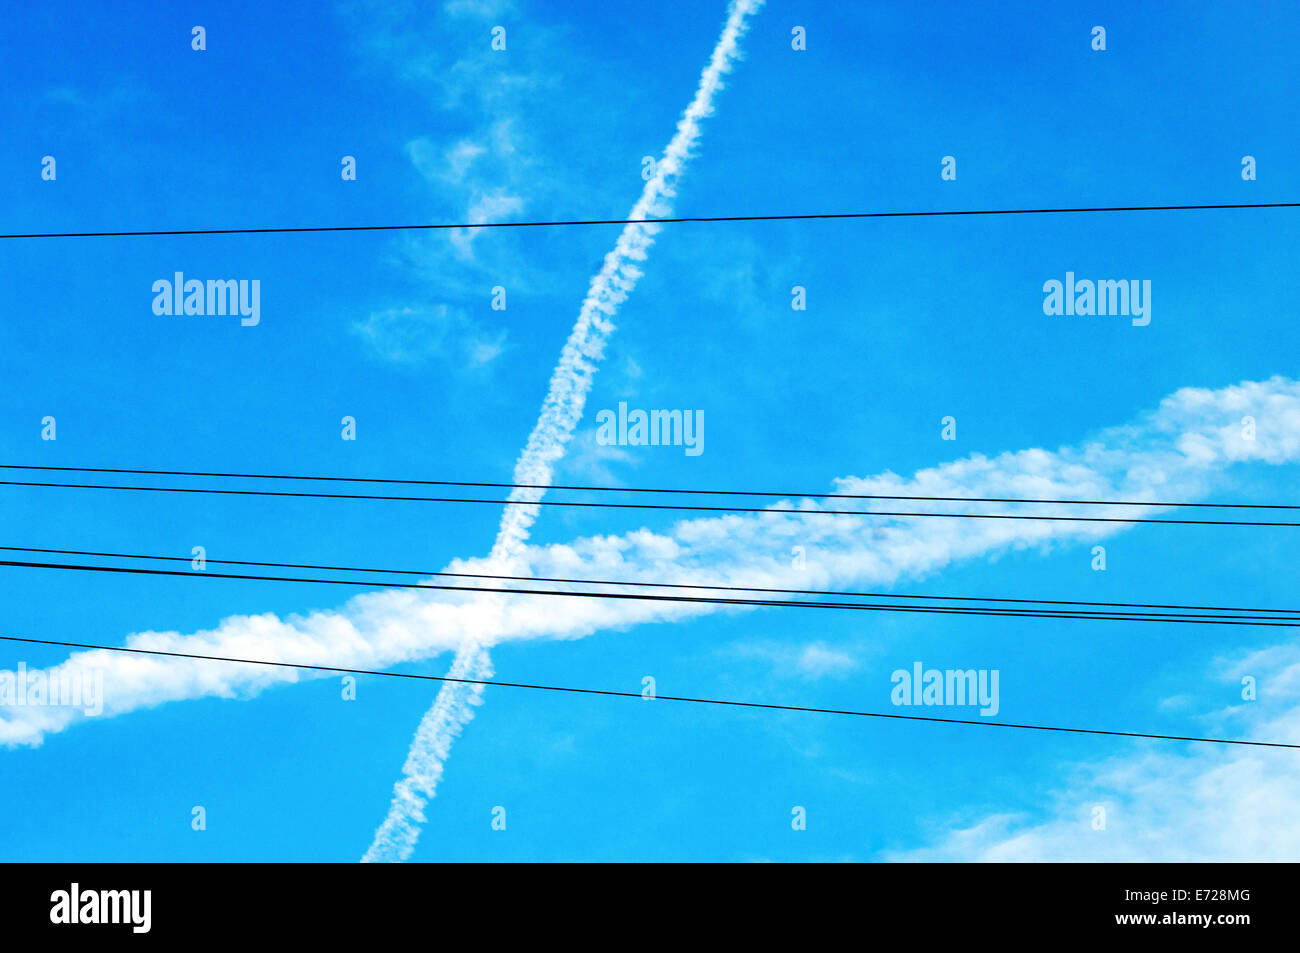 Vapor trails and telephone wires against blue sky Stock Photo